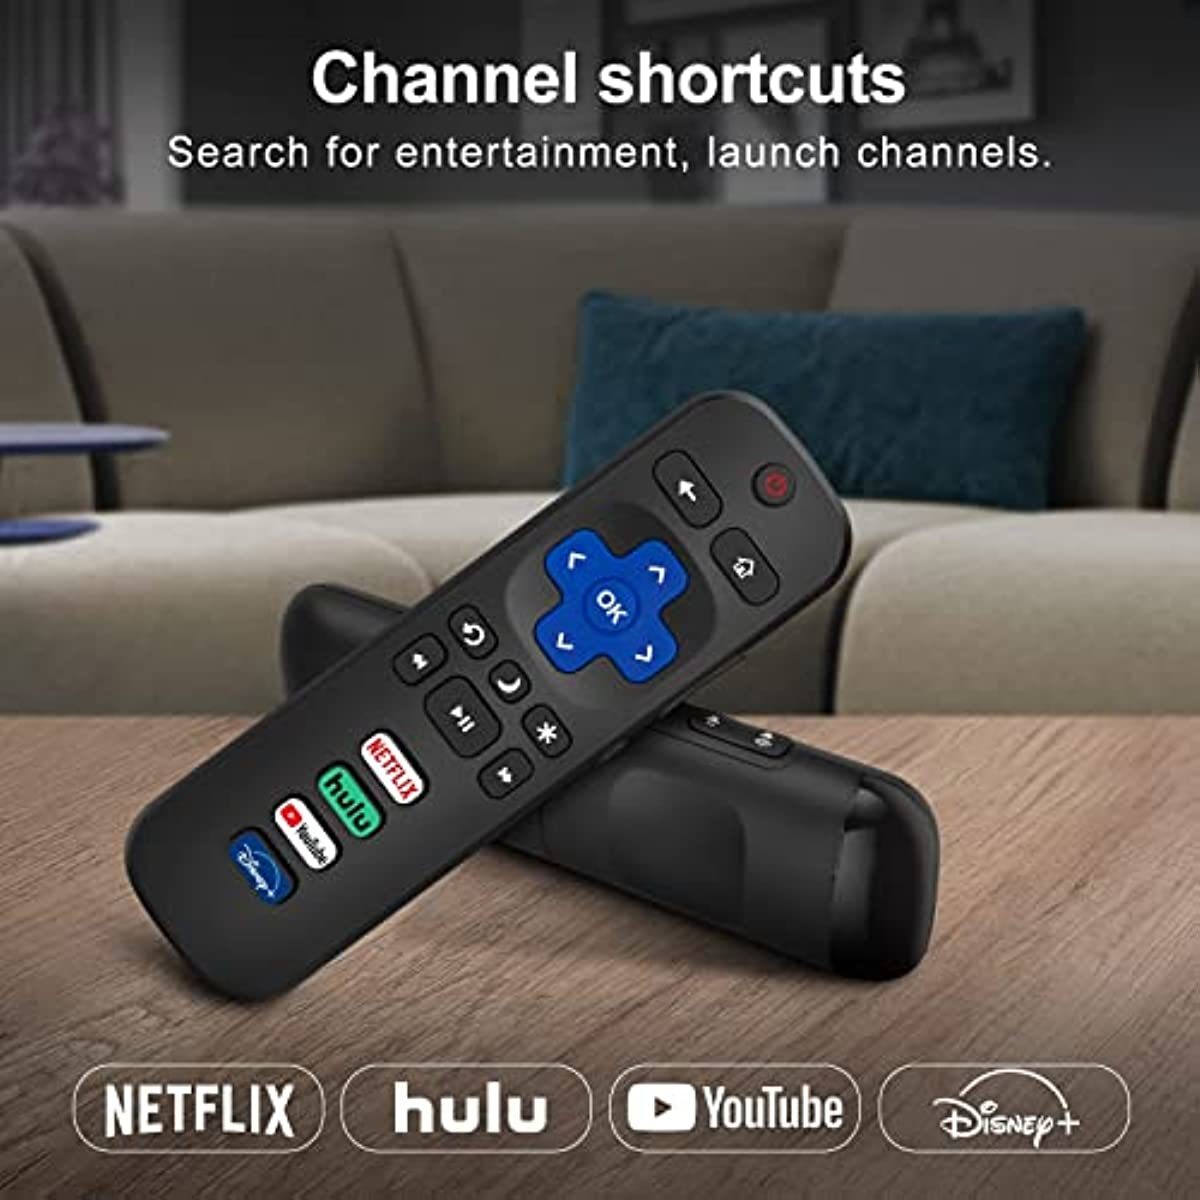 (Pack of 2) Replaced Remote Control Only for Roku TV; Compatible for TCL/Hisense/Onn/Sharp/Element/Westinghouse/Philips Roku Series Smart TVs (Not for Roku Stick and Box)